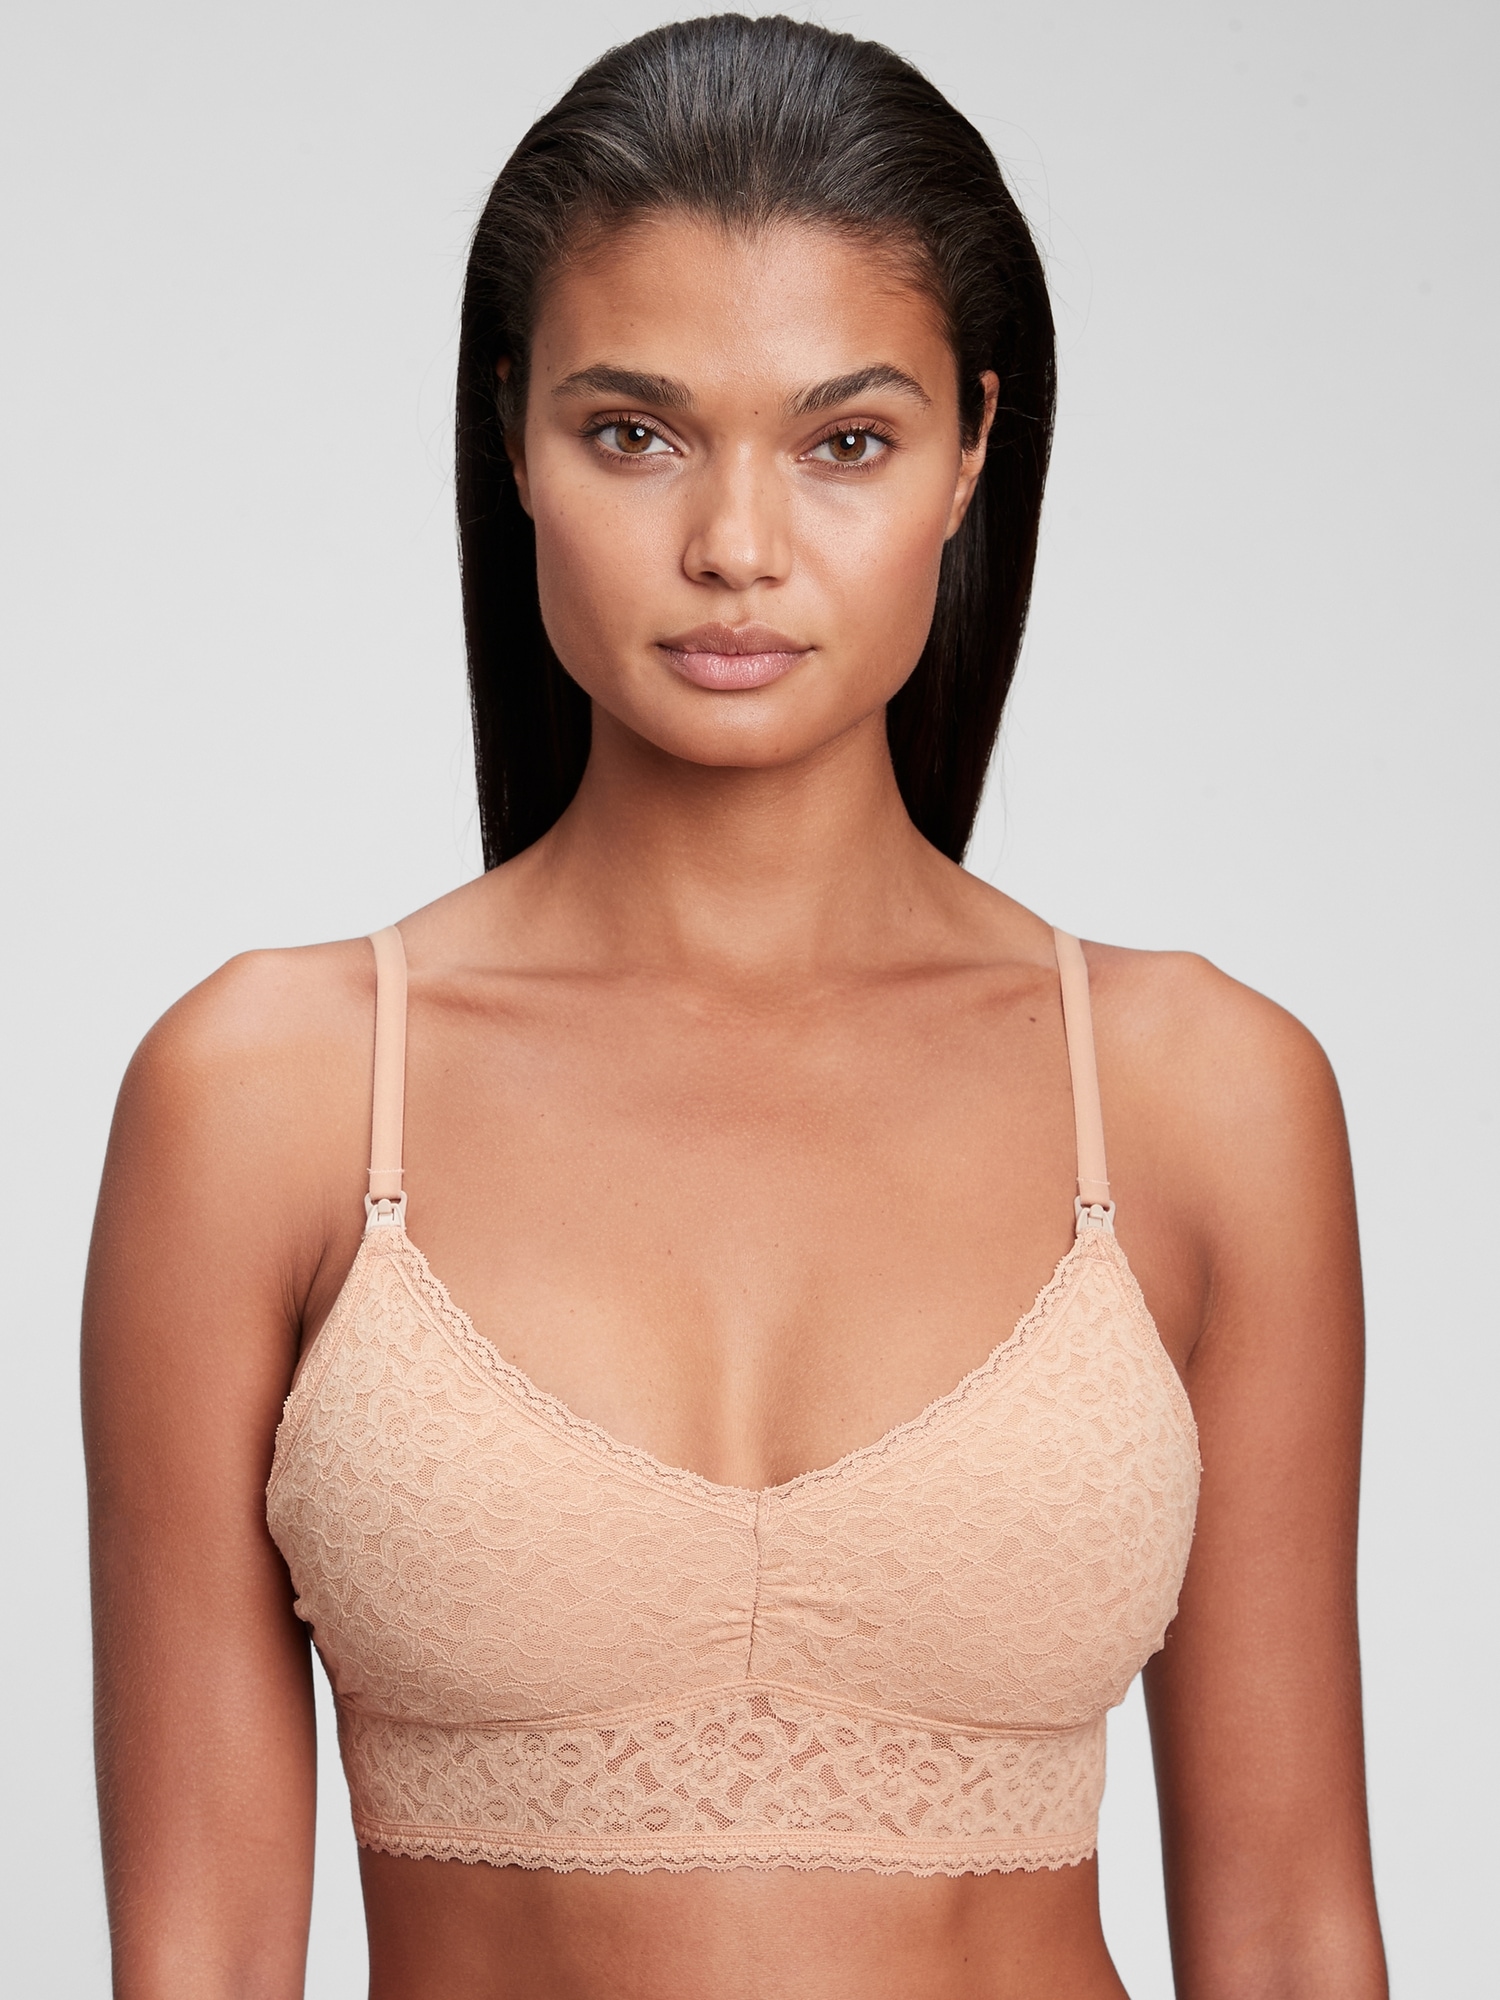 Lace Front Open Nursing Bra Soft Lace Breathable Seamless